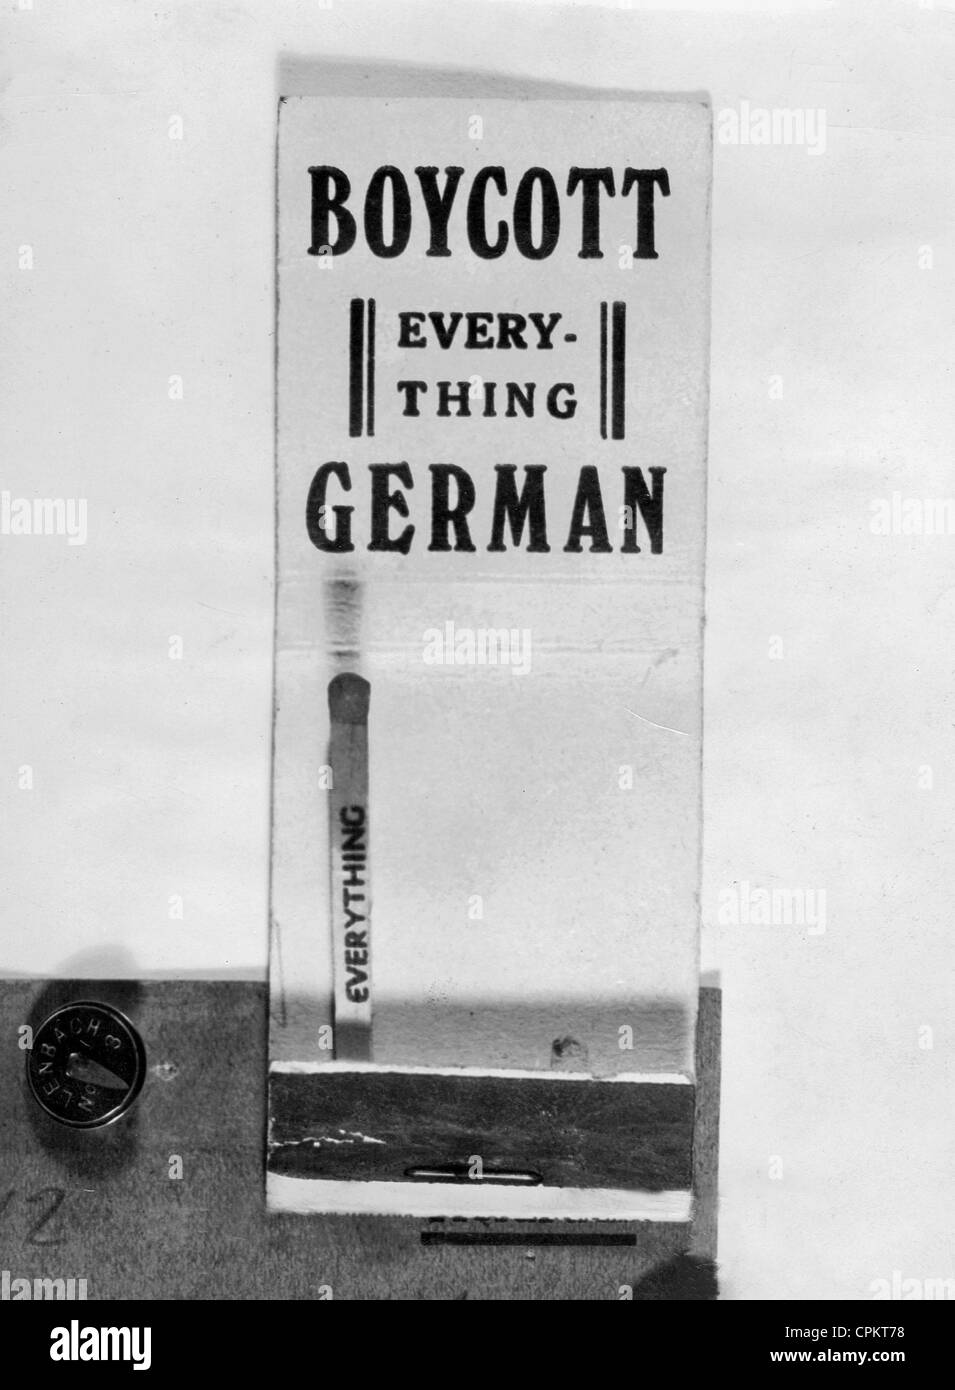 Matchbook calling for a boycott of German goods, 1939 Stock Photo